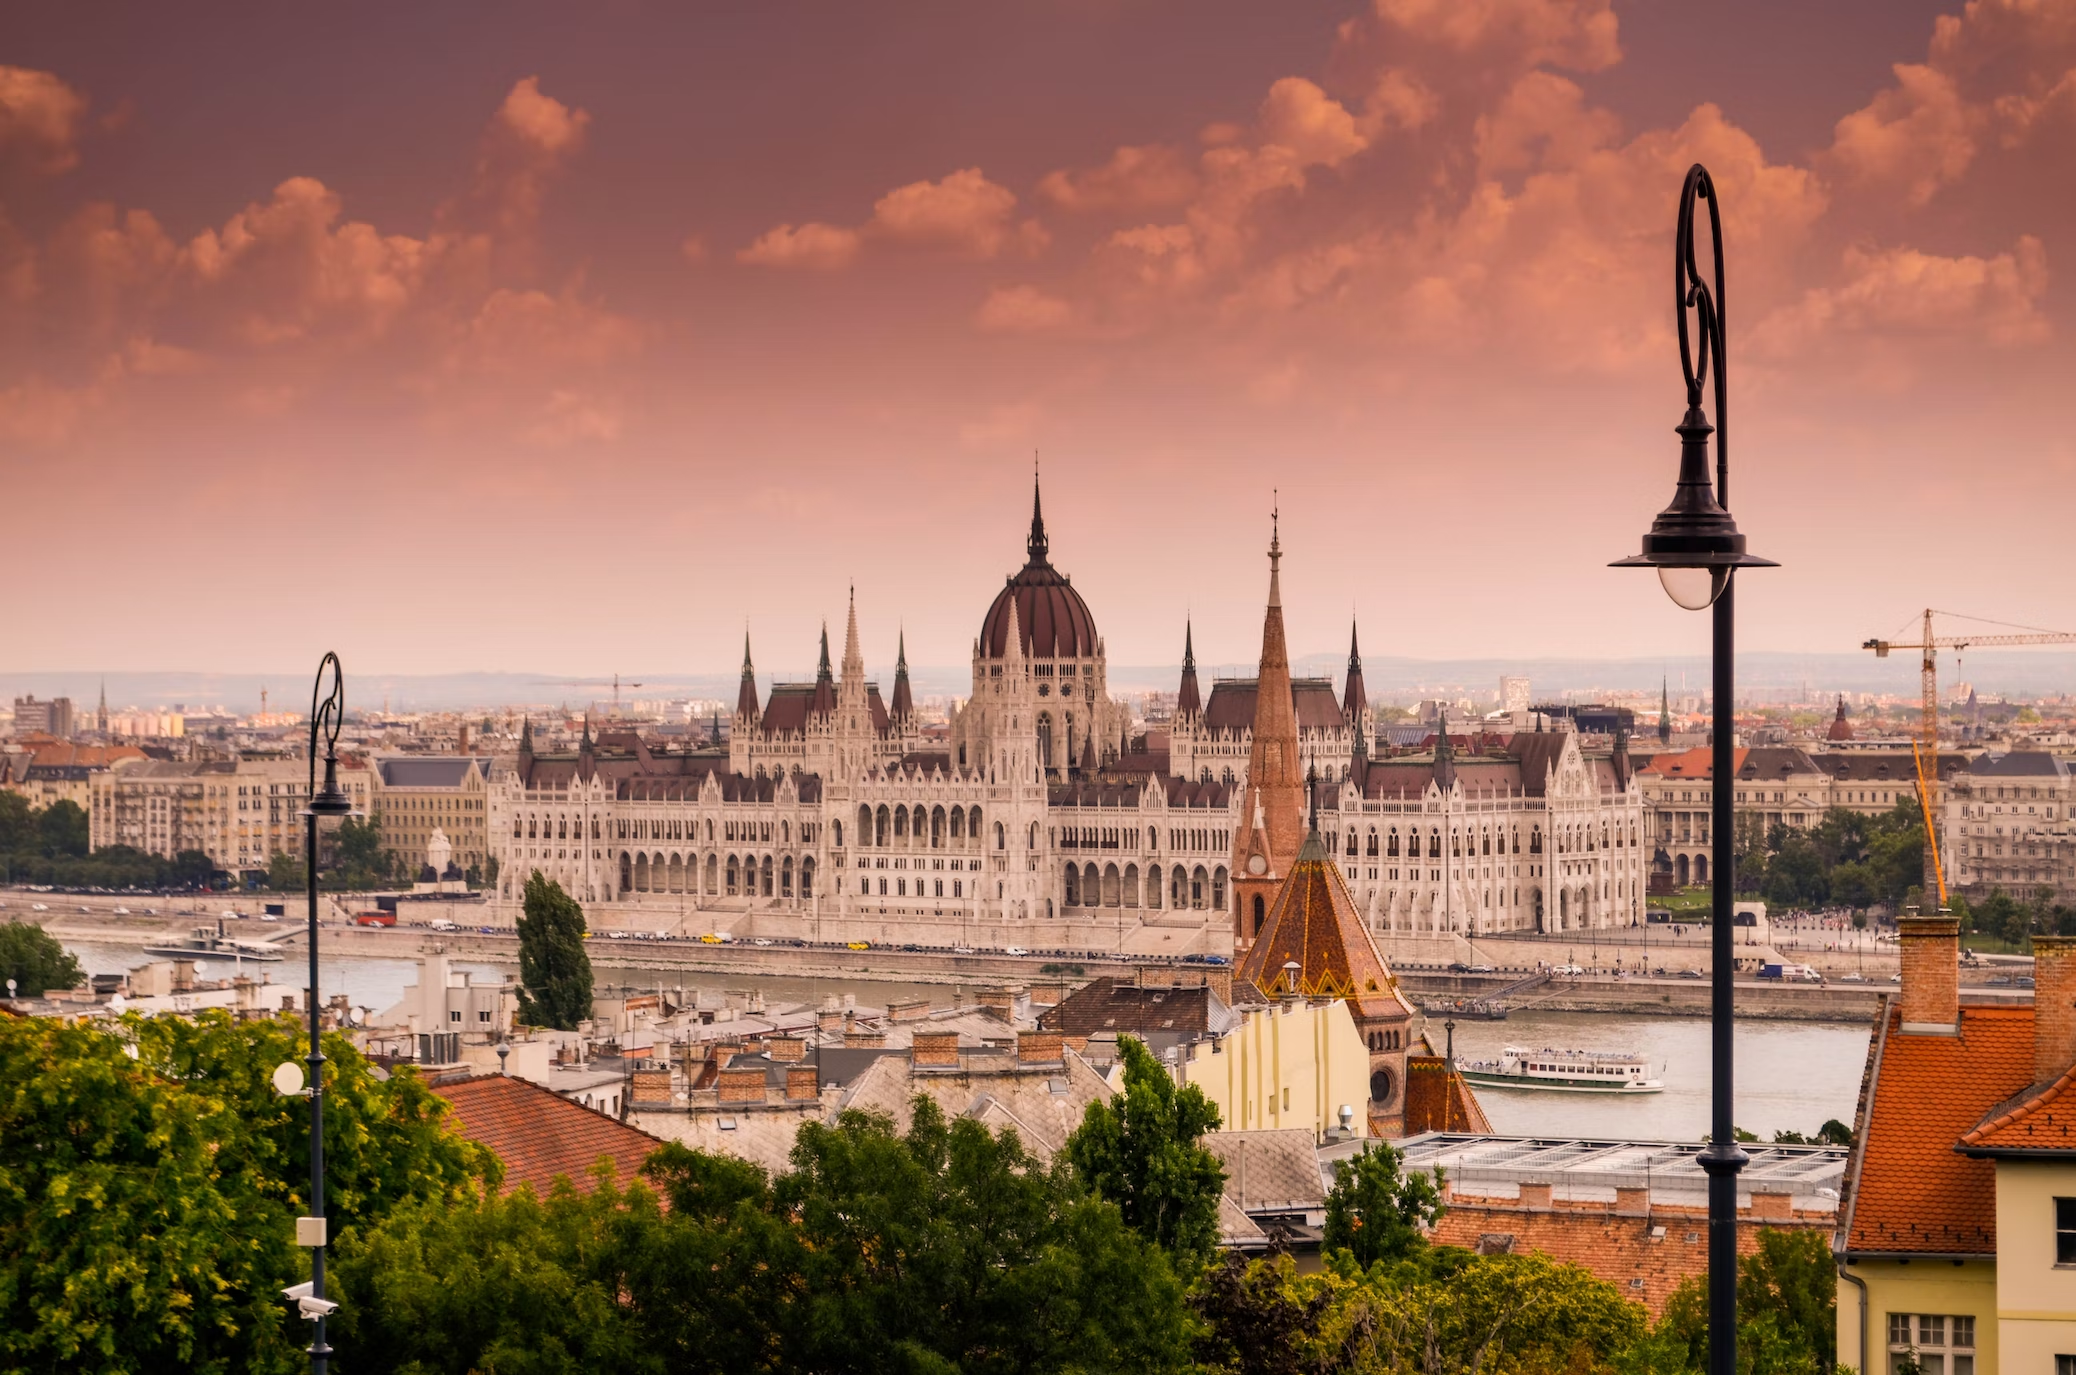 Budapest is one of the cities in Eastern Europe